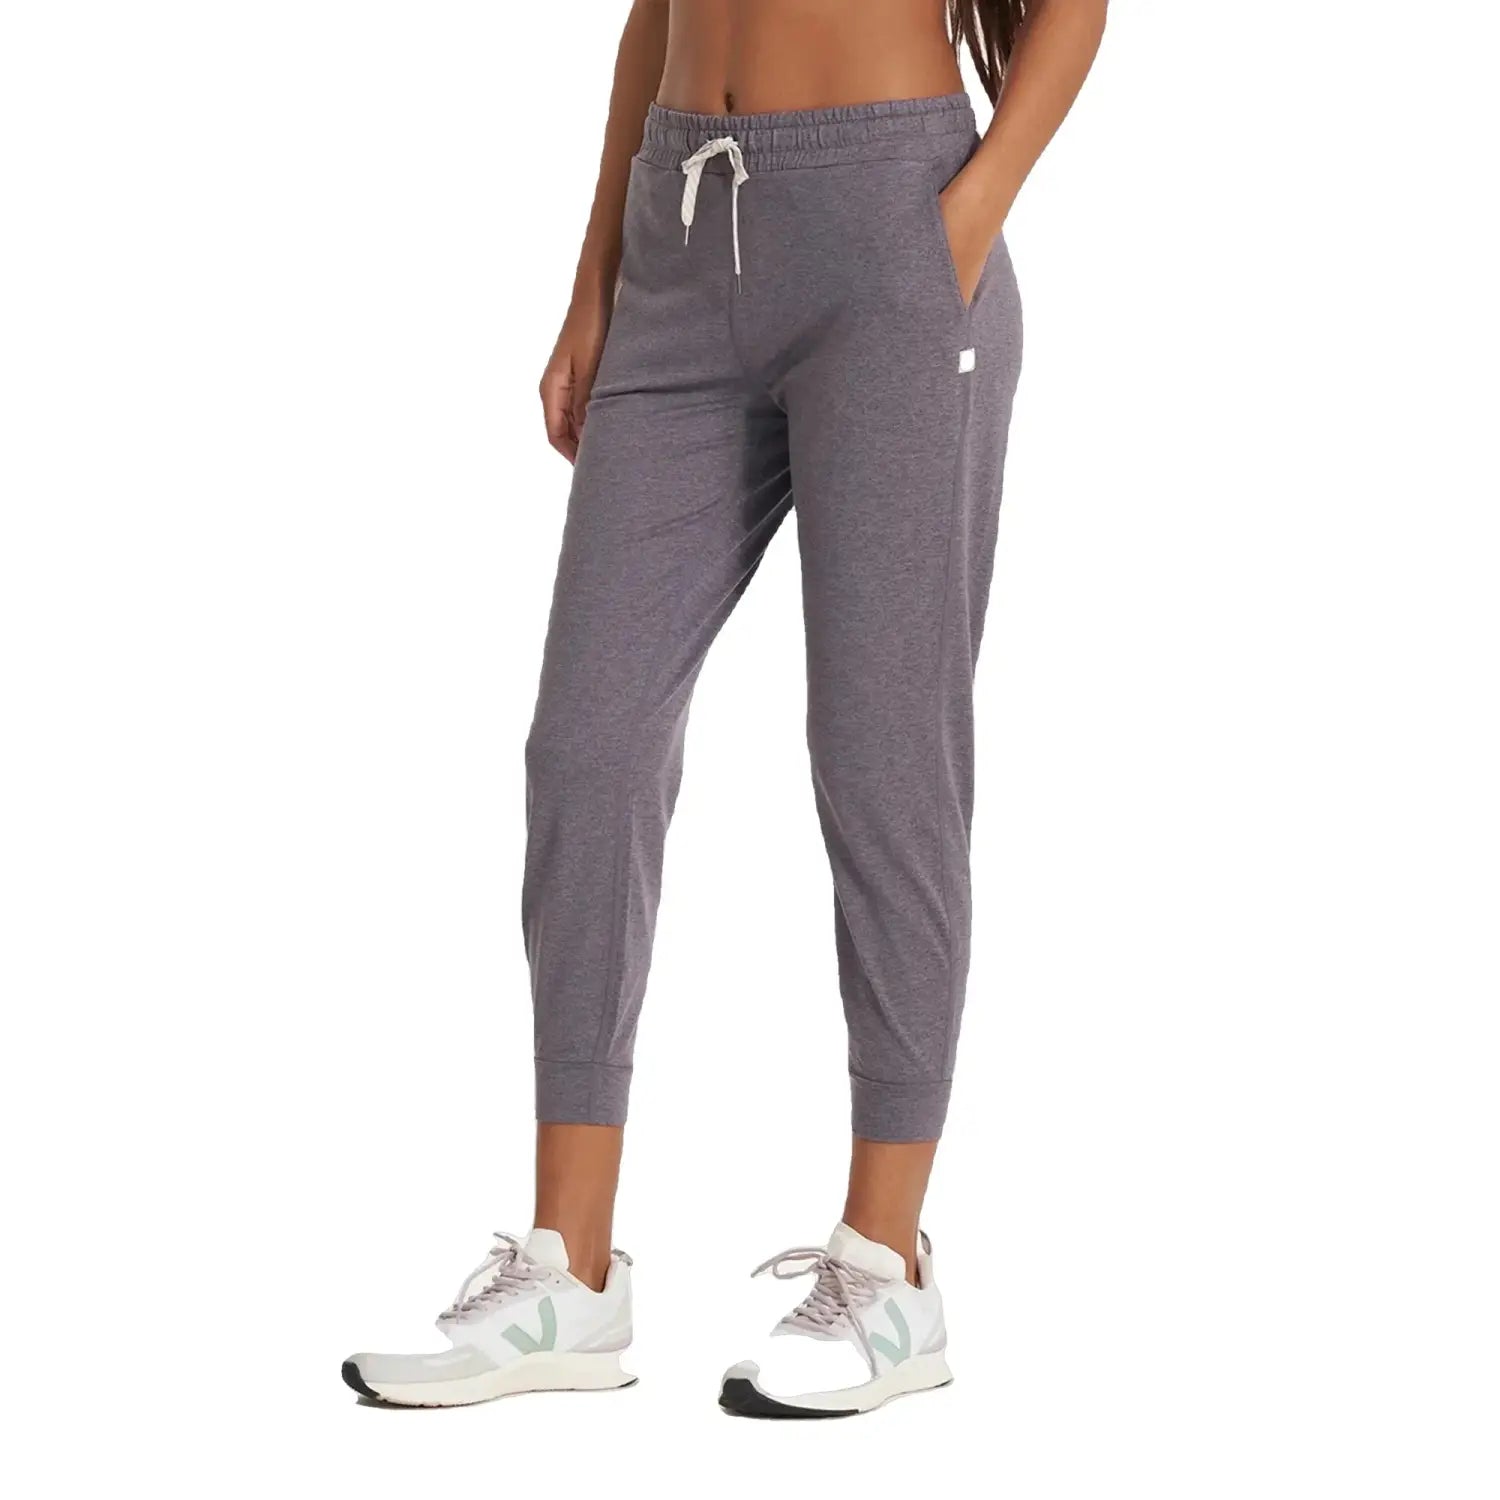 Vuori Women's Performance Jogger shown on model in Sawyer Heather, a light purple heathered color. Front View.